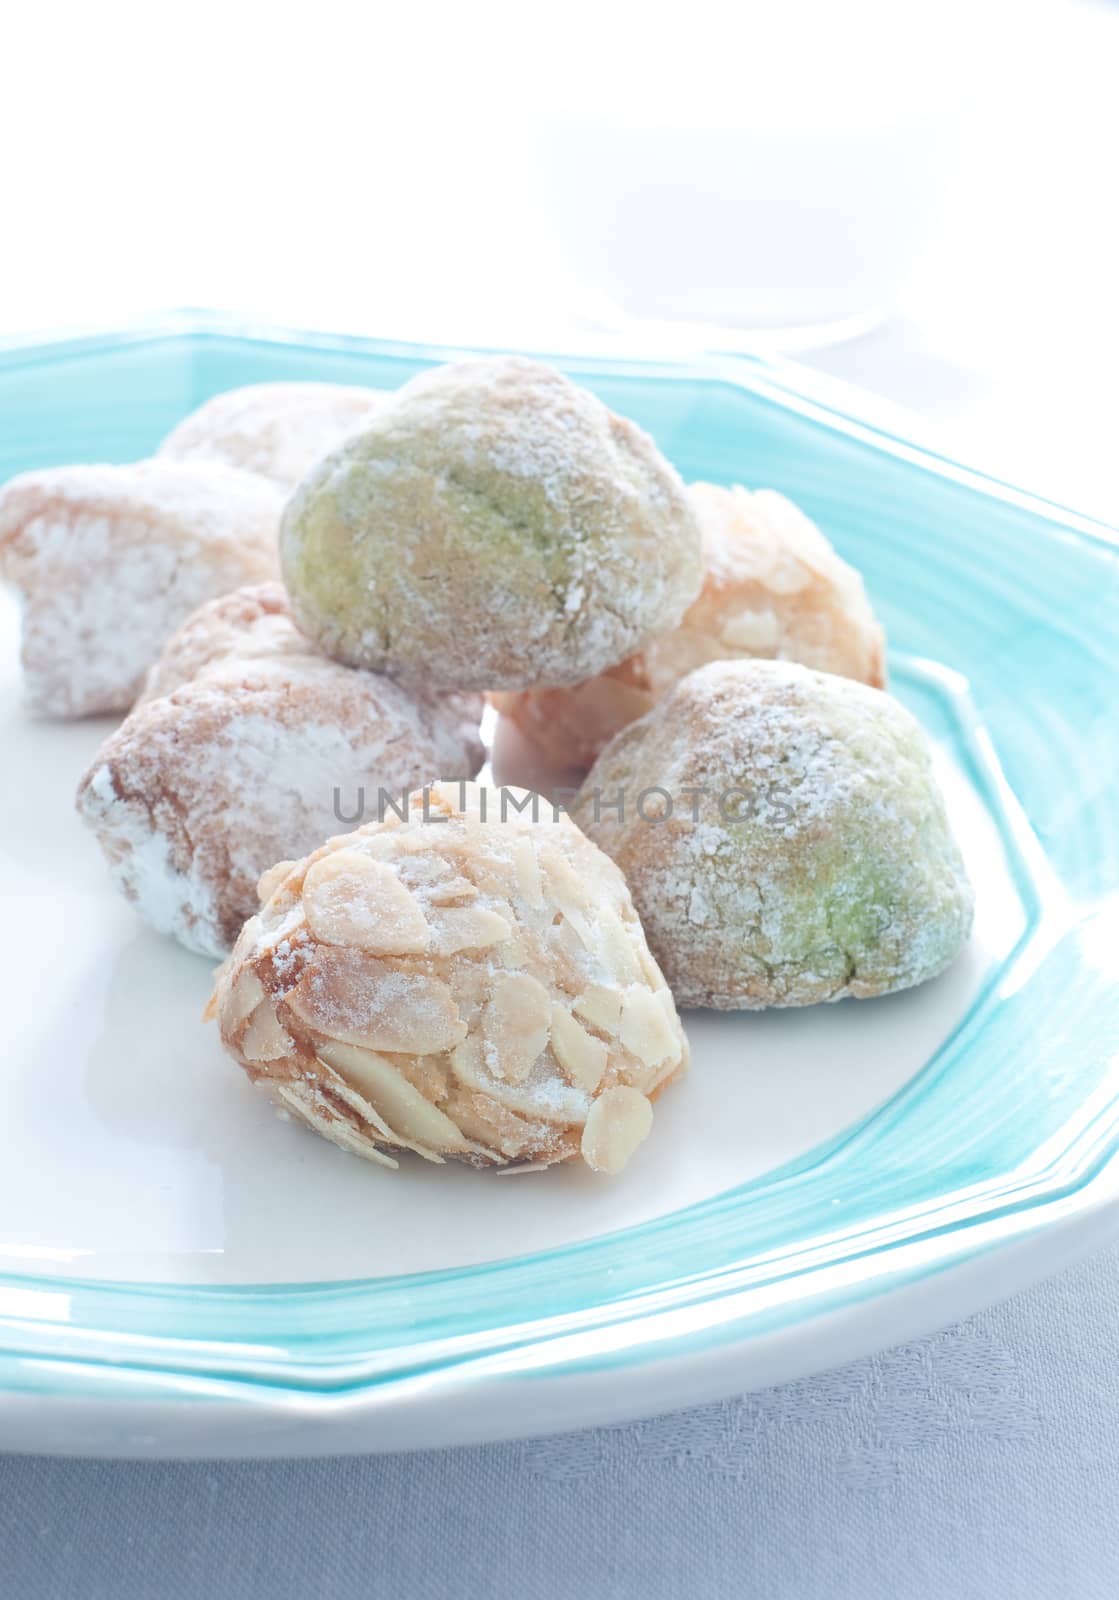 
Sicilian biscuits made with almond paste by gringox